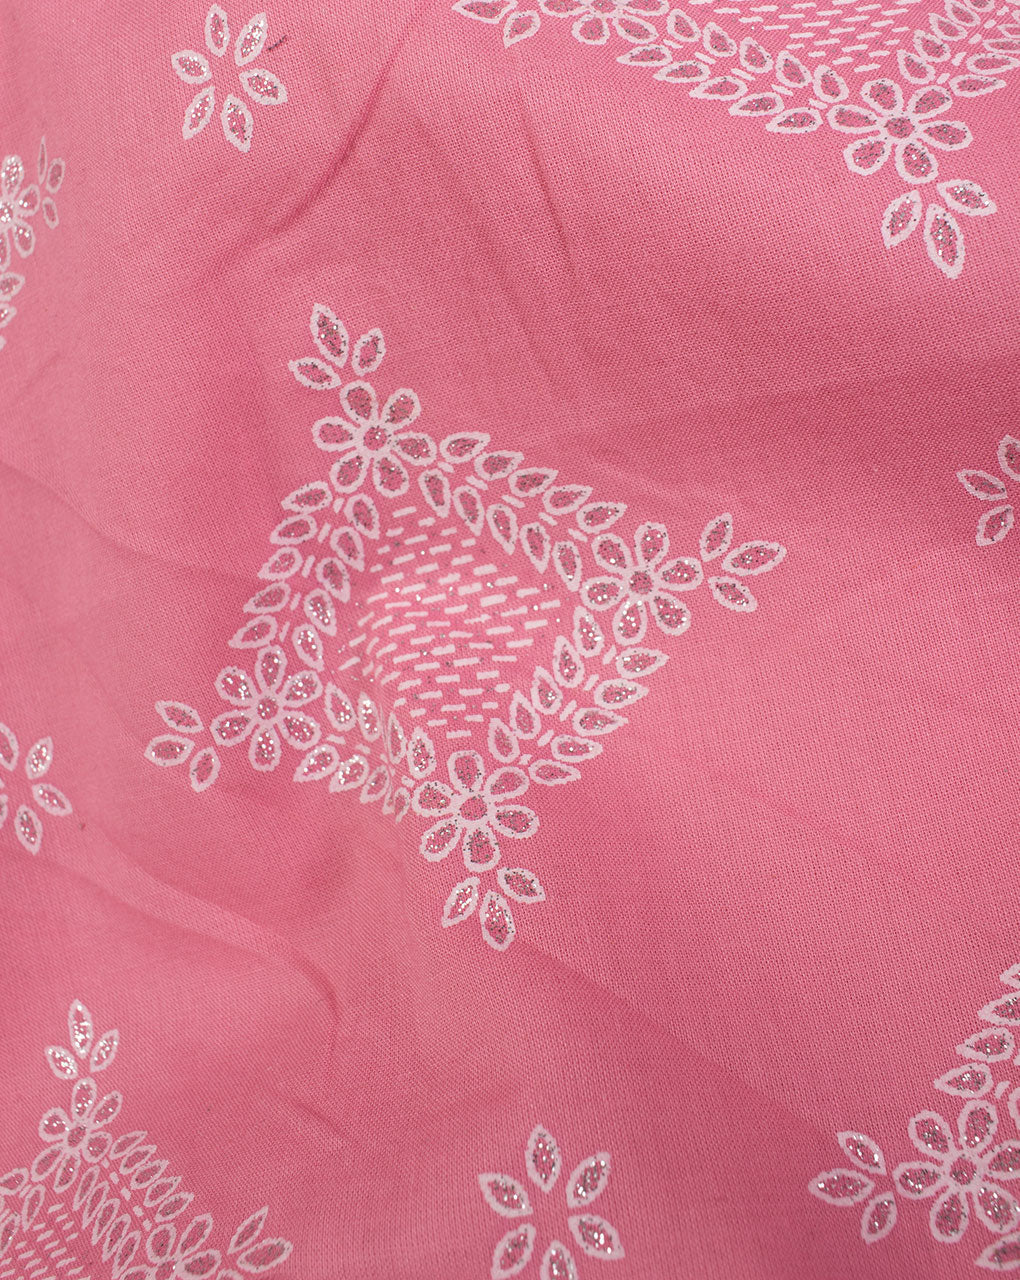 Pink Silver Traditional Pattern Foil Screen Print Cotton Fabric - Fabriclore.com